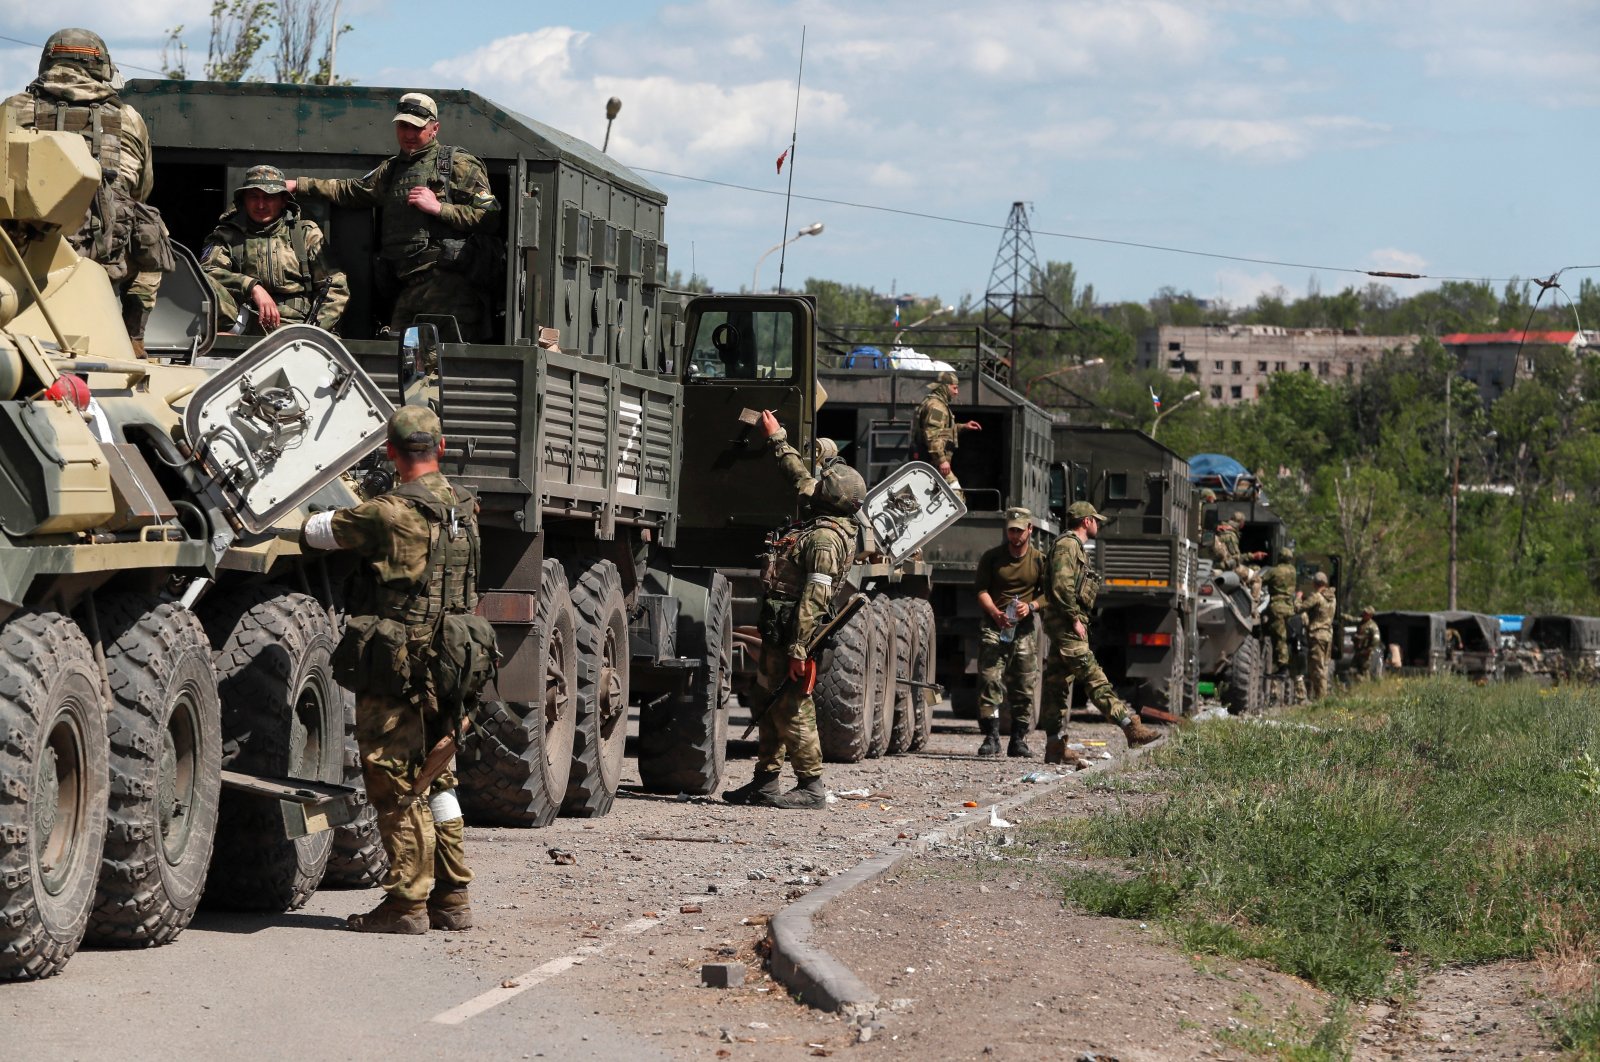 A convoy of pro-Russian troops is seen before the expected evacuation of wounded Ukrainian soldiers from the besieged Azovstal steel mill in the course of Ukraine-Russia conflict in Mariupol, Ukraine, May 16, 2022. (Reuters Photo)